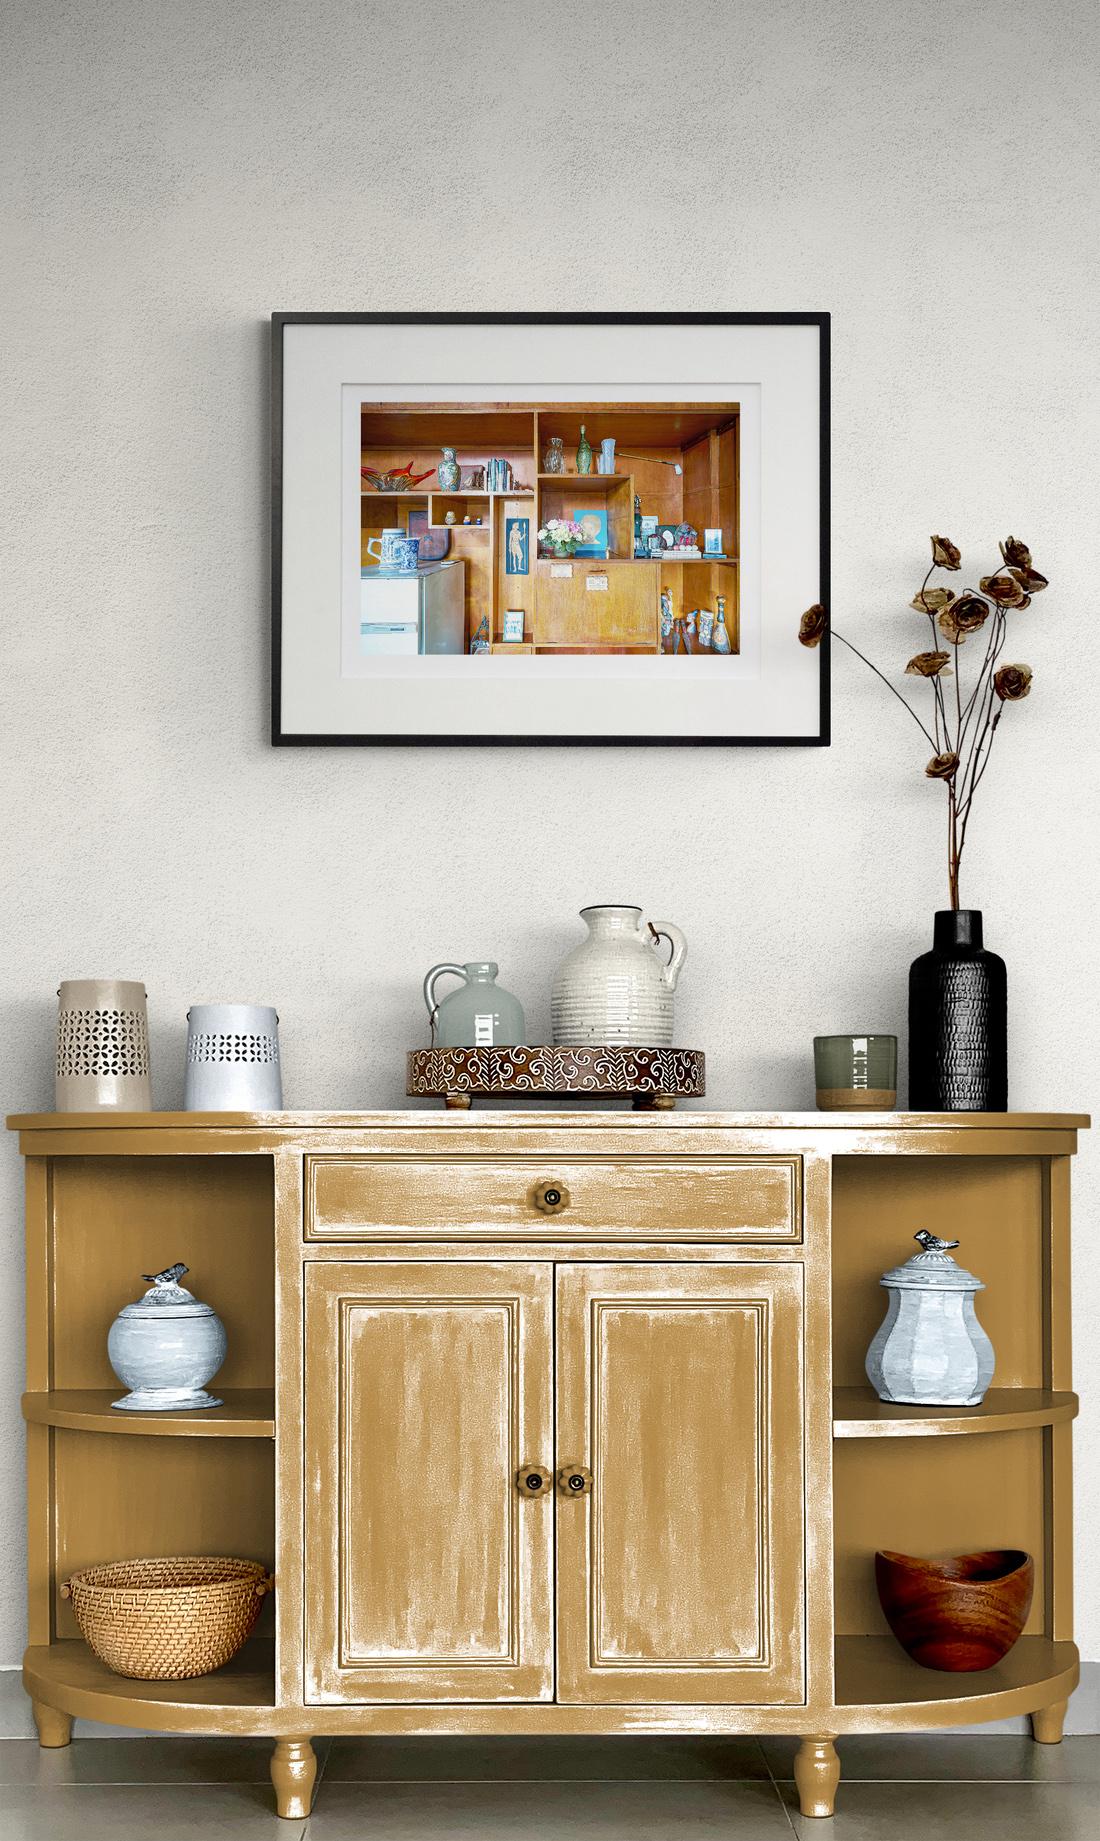 Shani Mootoo’s nostalgic images of her childhood home in Trinidad reveal an intimate and compelling story. Her ‘History Revisited’ series—photographs of interior rooms, furniture and trinkets are portraits of a life. This wood wall cabinet contains